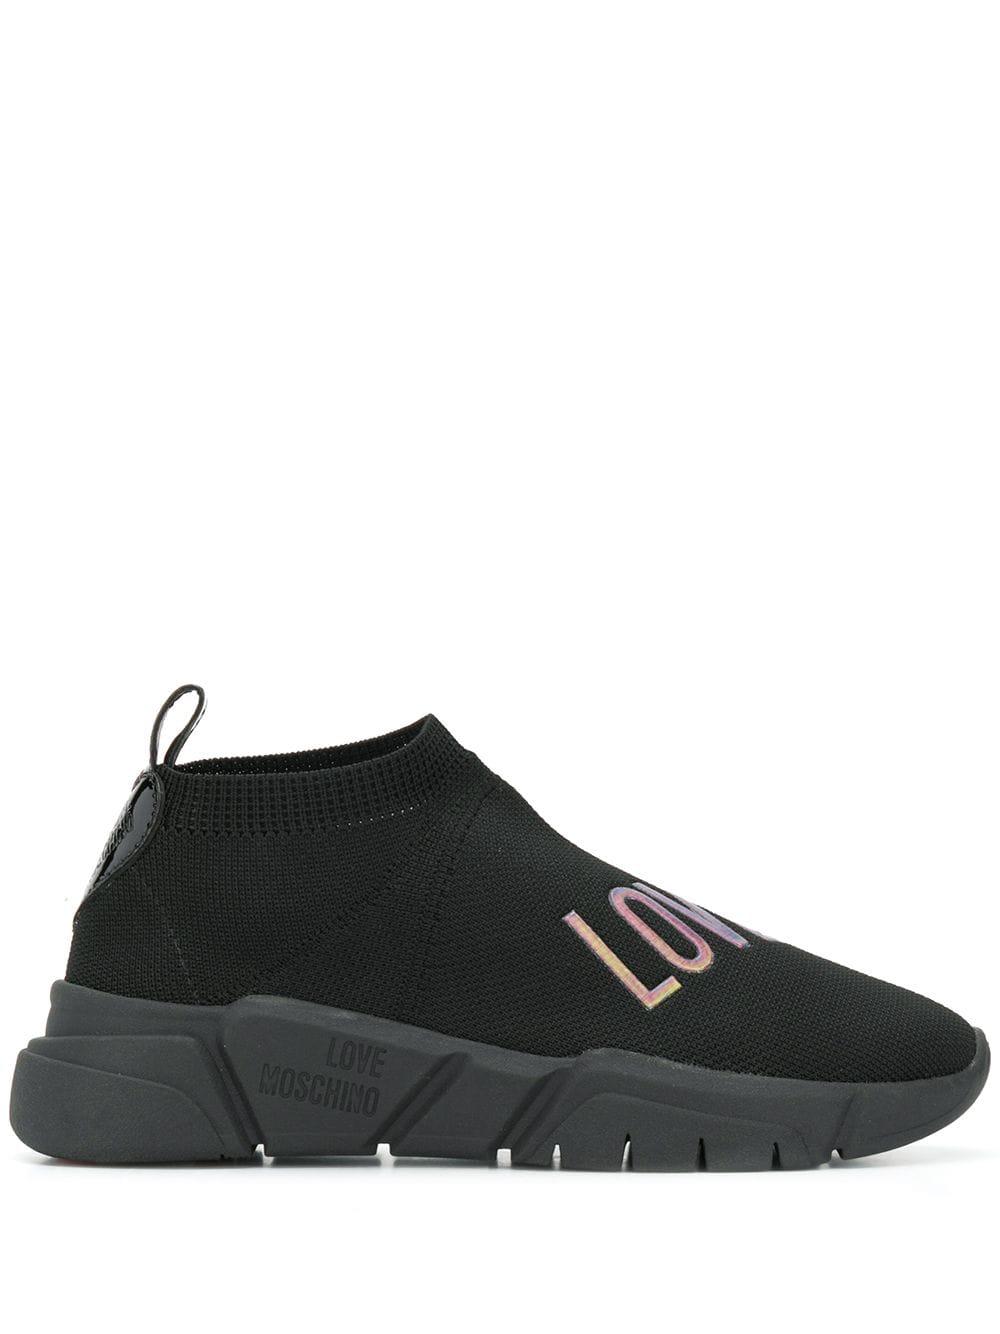 Love Moschino Synthetic Embroidered Logo Sock Sneakers in Black - Lyst